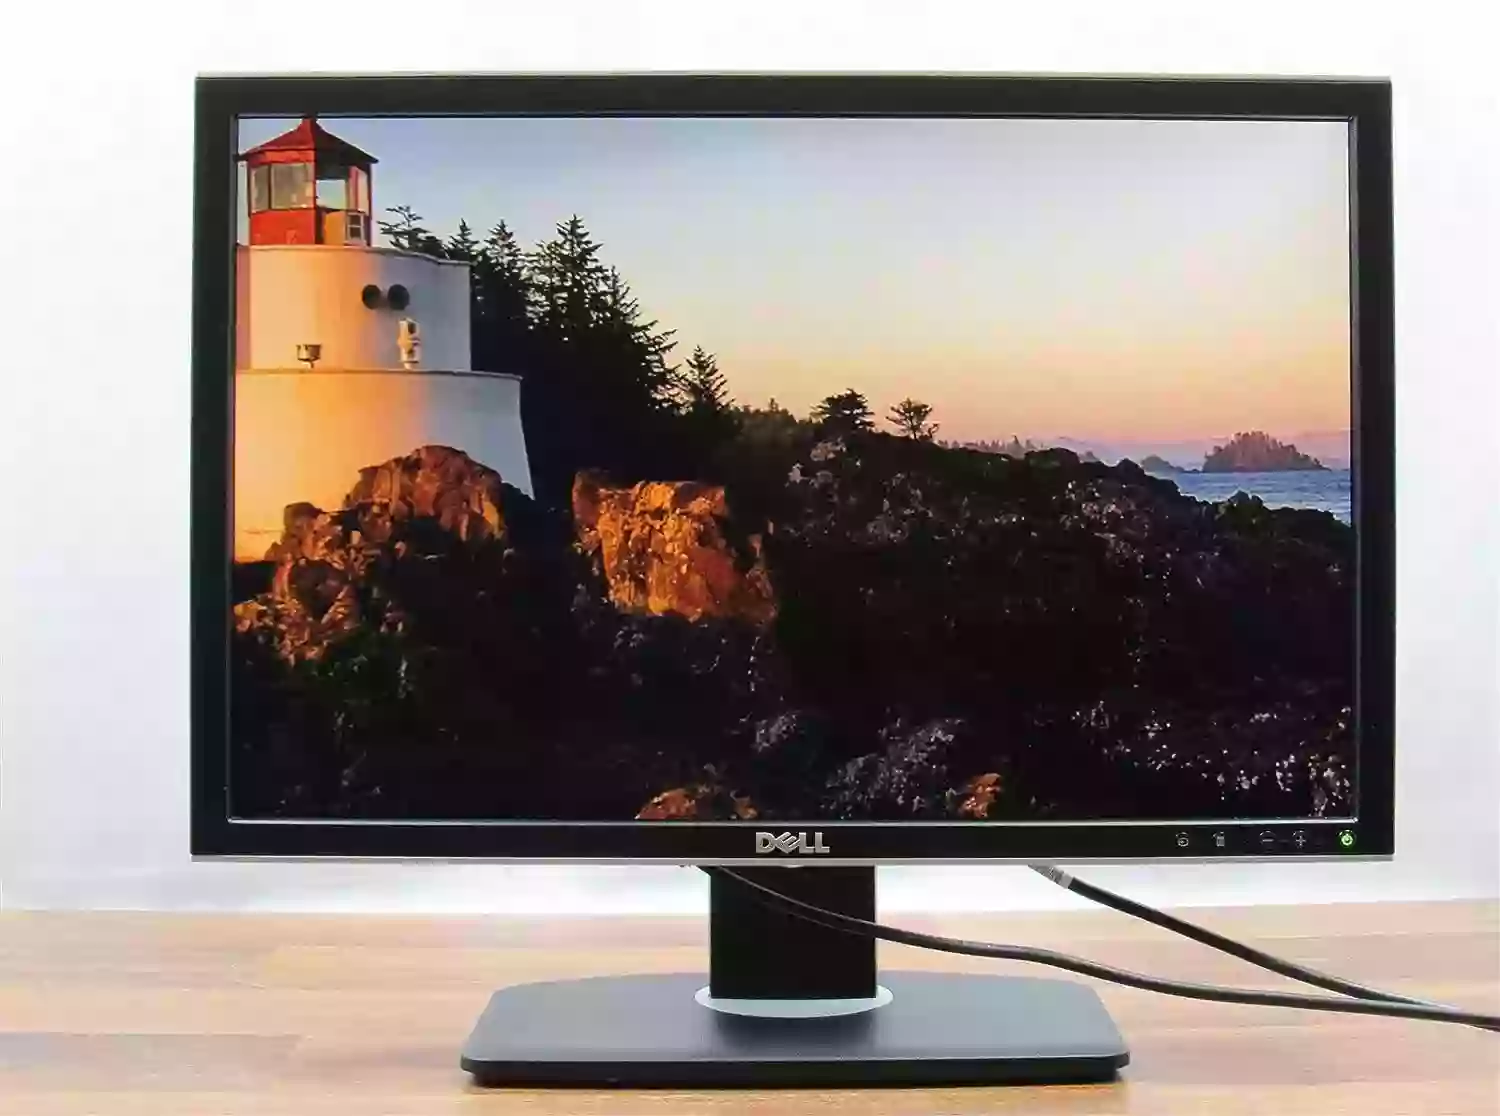 24 inch refurbished full HD 1080p tft Monitor with multiple universal inputs { Dell UltraSharp 2408WFPb}